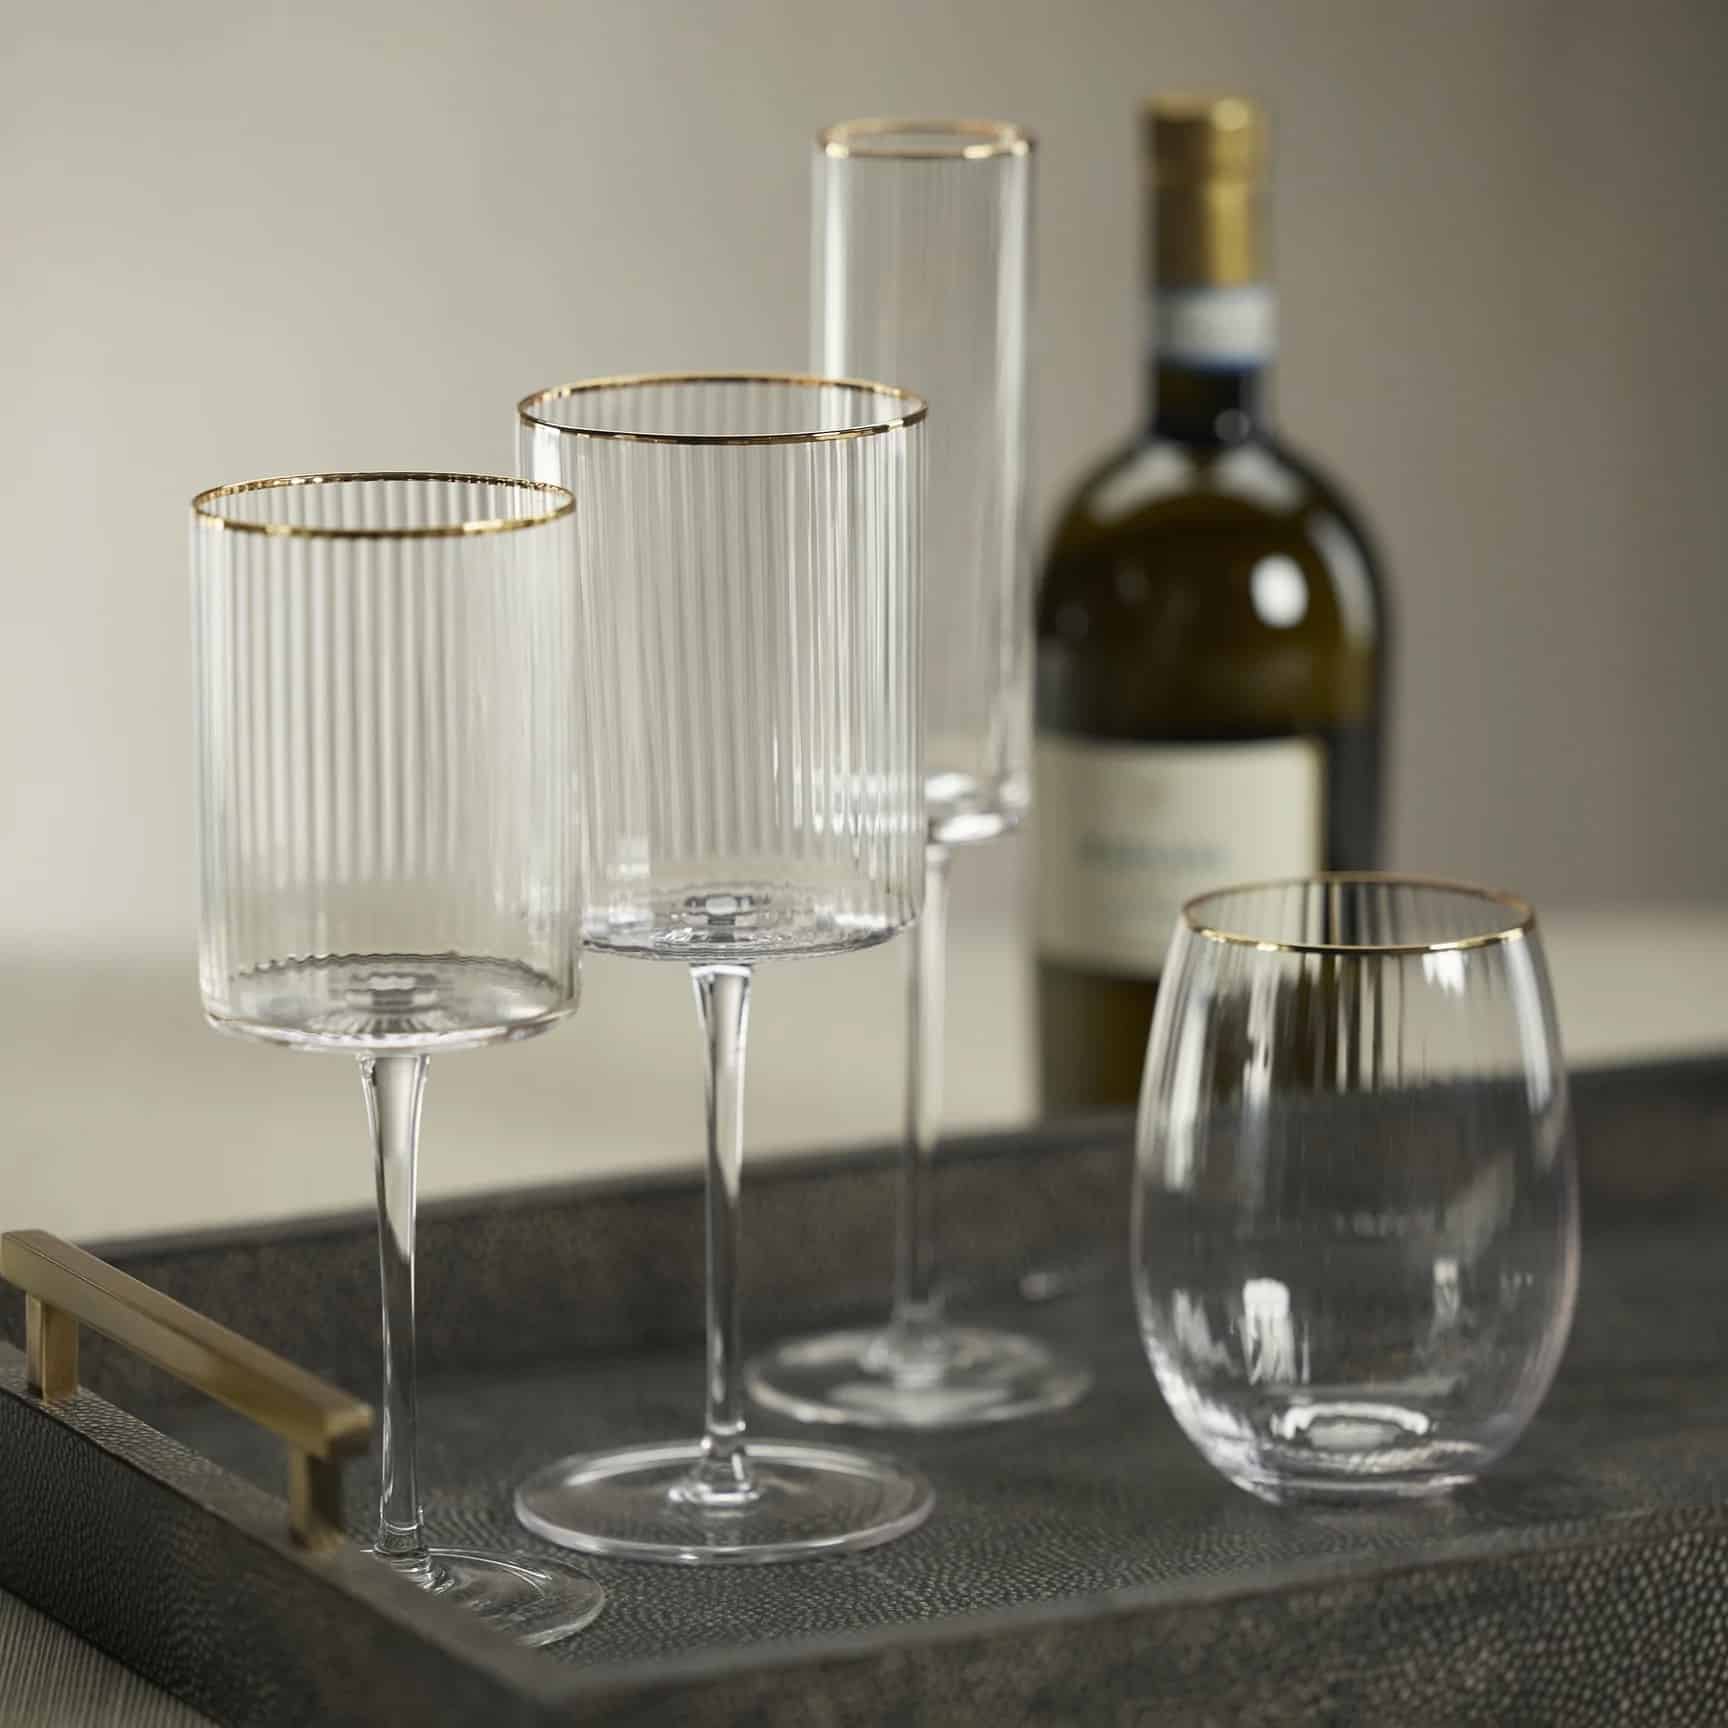 Fluted Wine Glass | Set of 4 | Living Beautifully